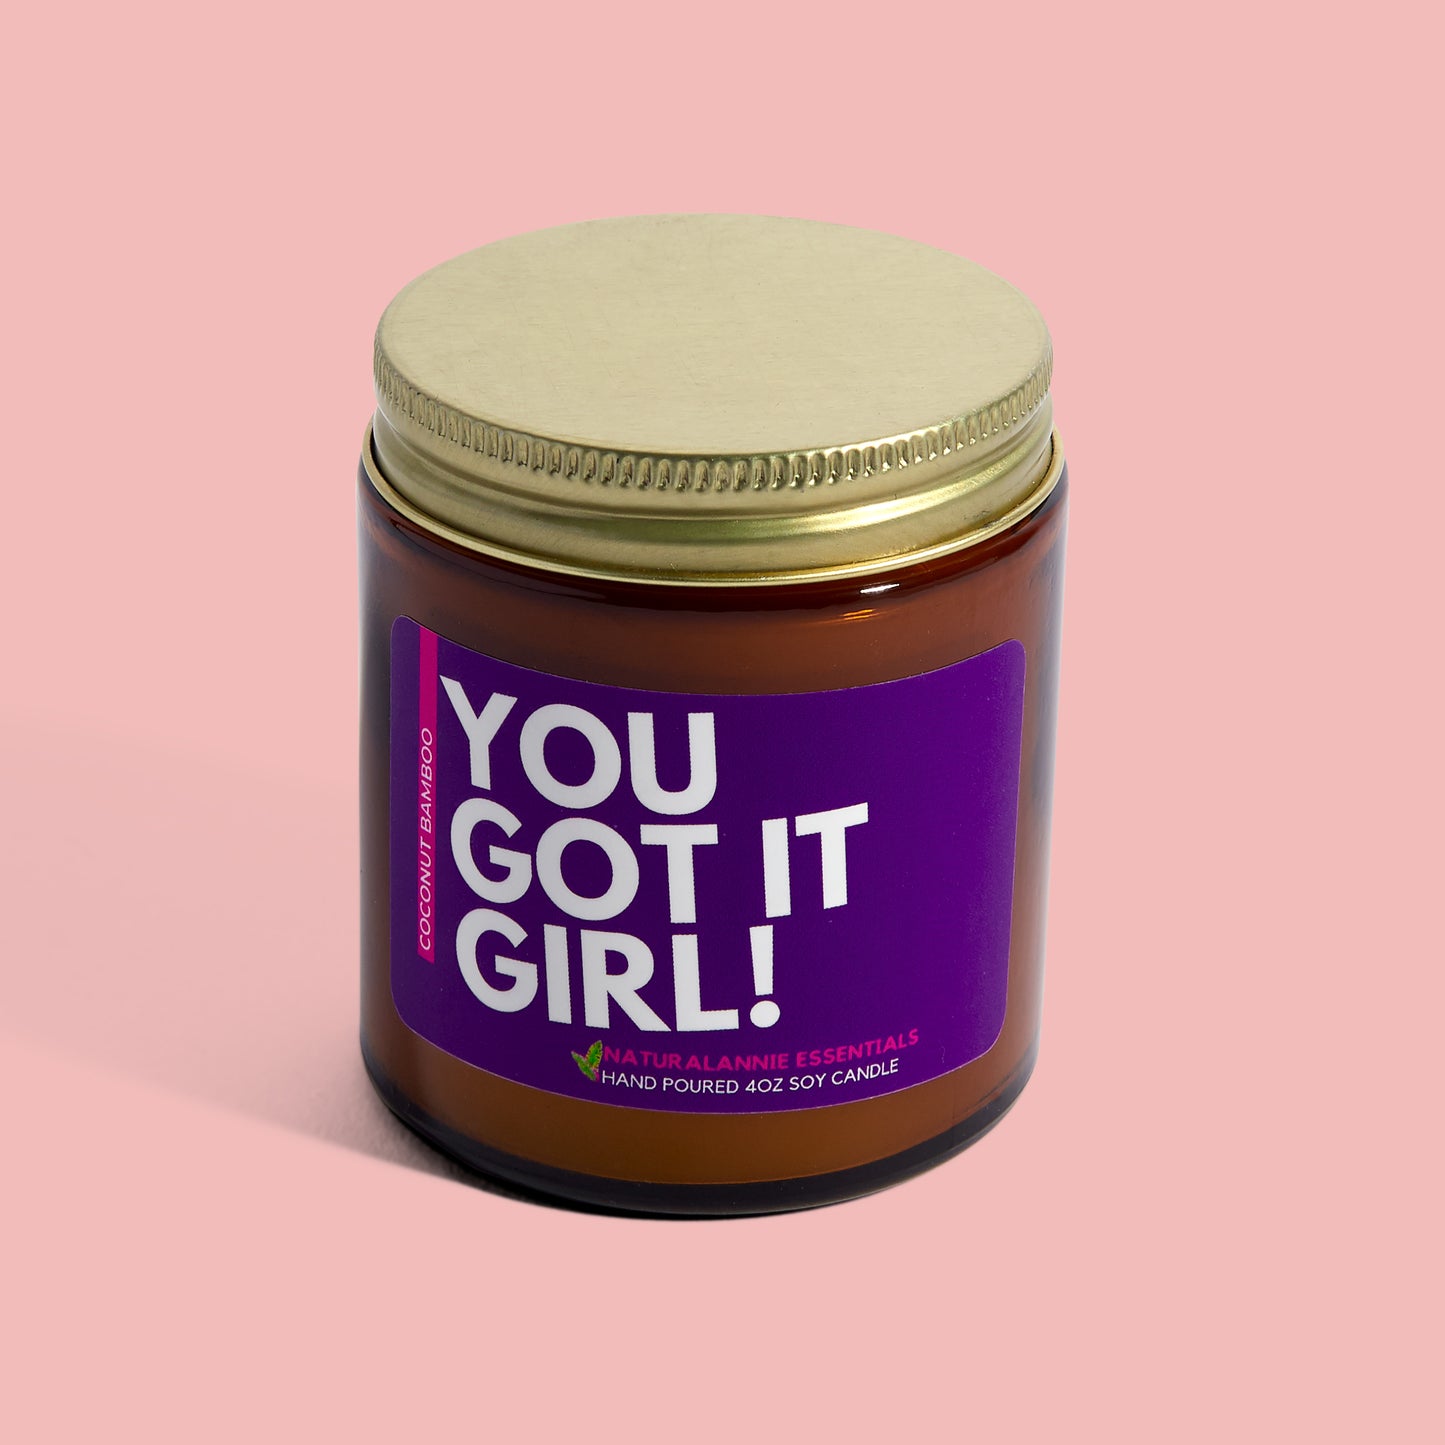 You Got It Girl! Coconut Bamboo Soy Candle